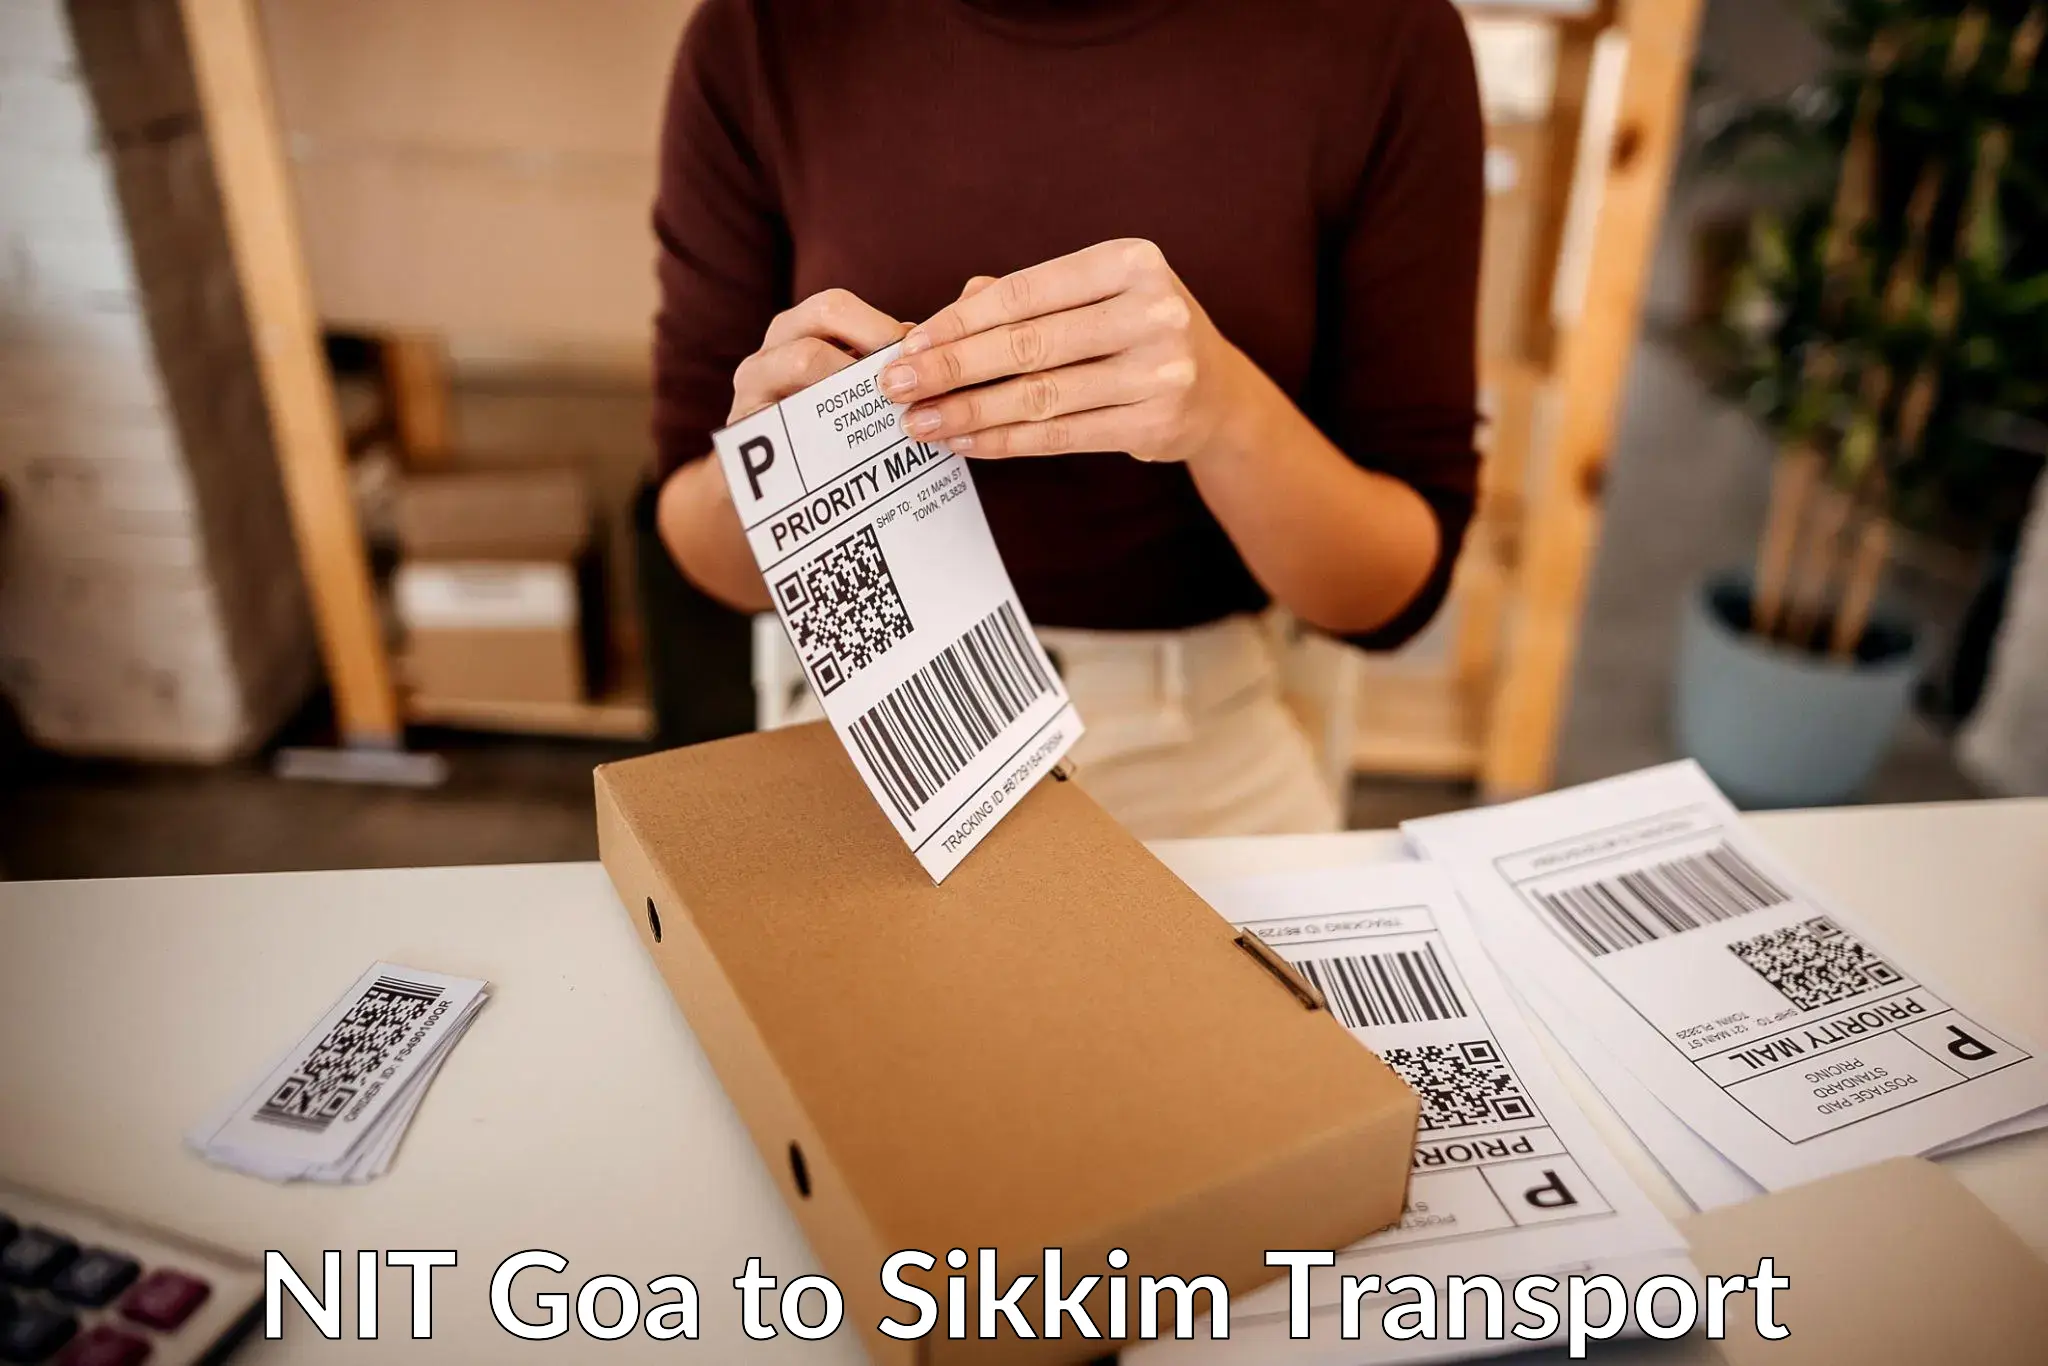 Interstate transport services NIT Goa to West Sikkim